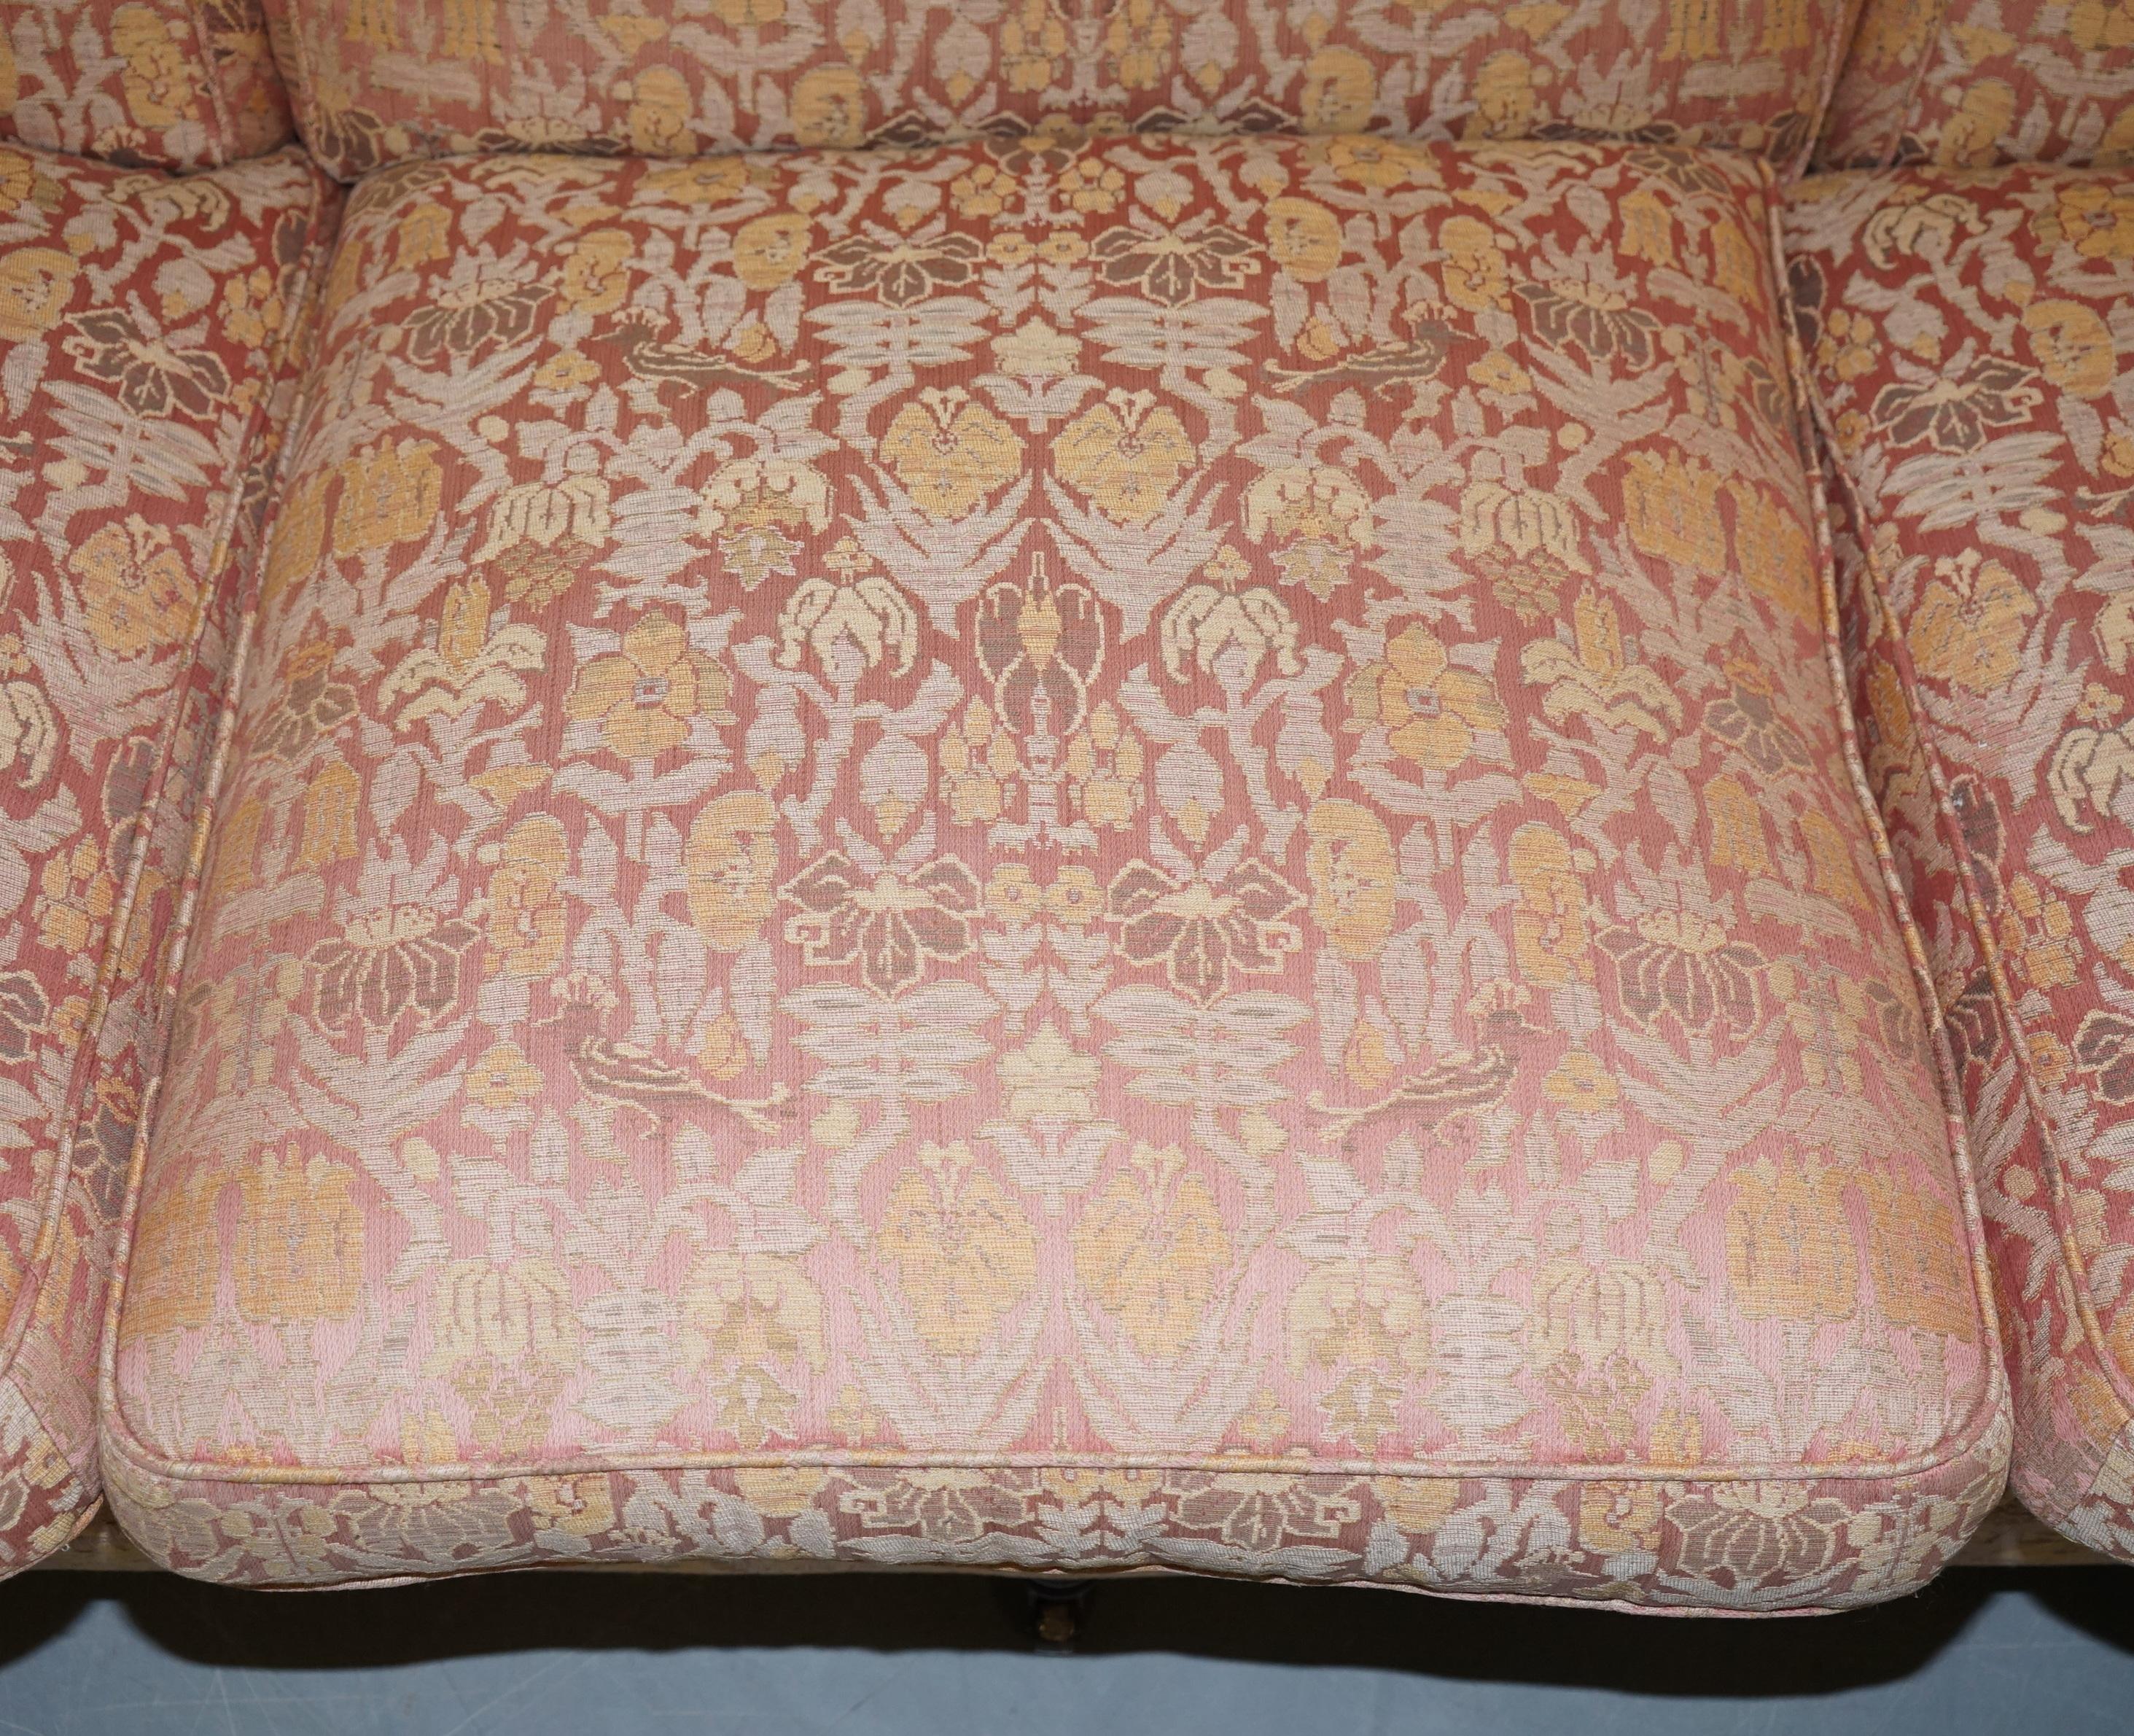 1 of 2 George Smith Scroll Arm Three-Seat Sofas Embroidered Fabric 2